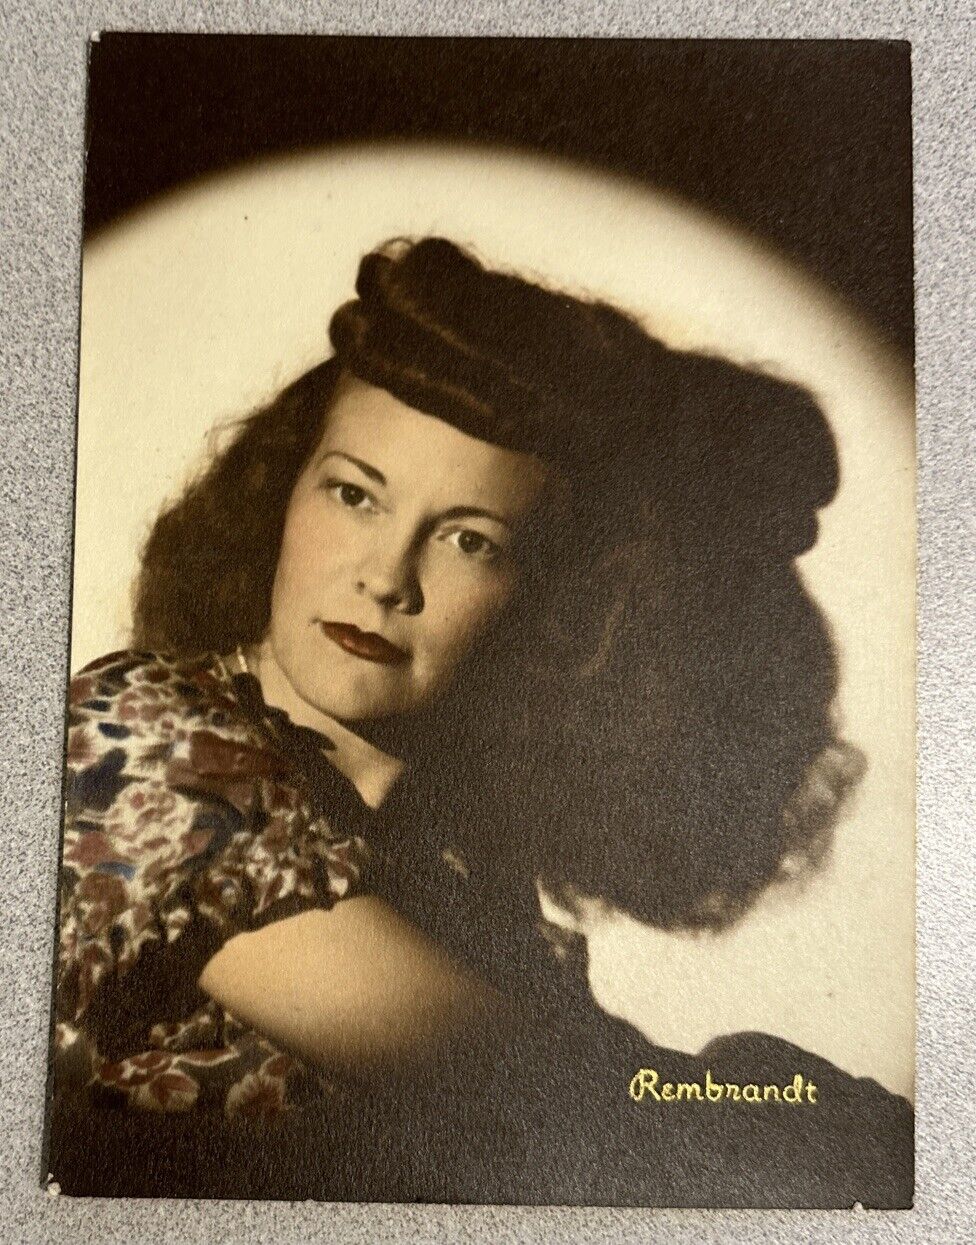 1940\'s Young Woman with Great Hair Style Photographer Studio Rembrandt Monroe LA